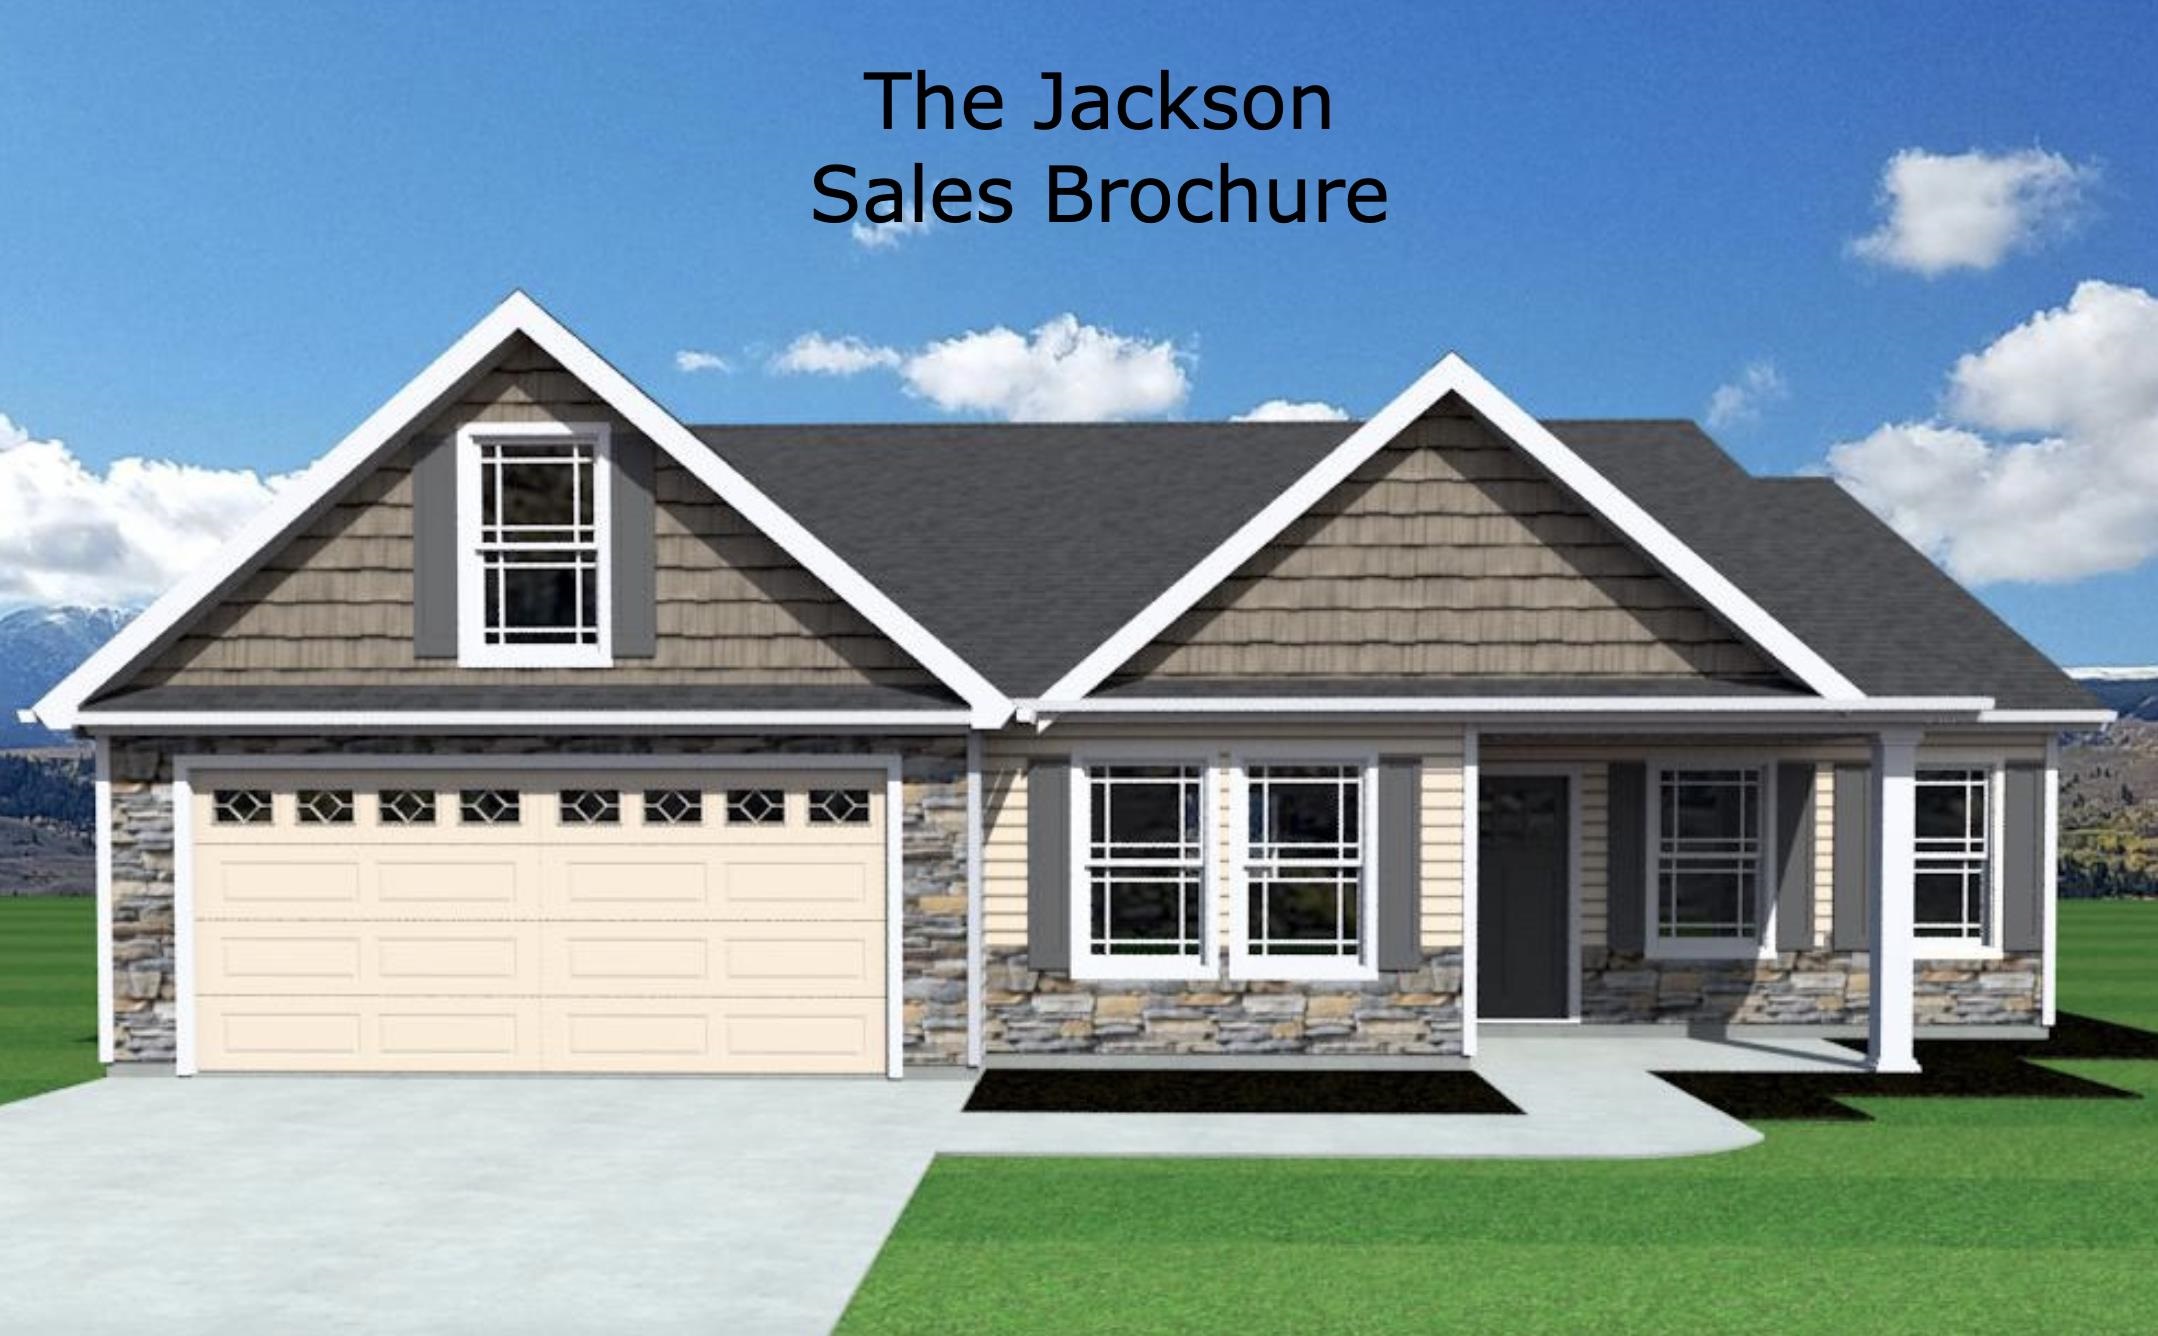 Lot 12 - The Jackson plan offers a beautiful, modern layout. Split floor plan. Kitchen open to living area.  Home complete with the trademark chair rail, crown molding, and rope lighting.  Also includes a 12x12 sunroom with 12x12 covered porch. Lot 12